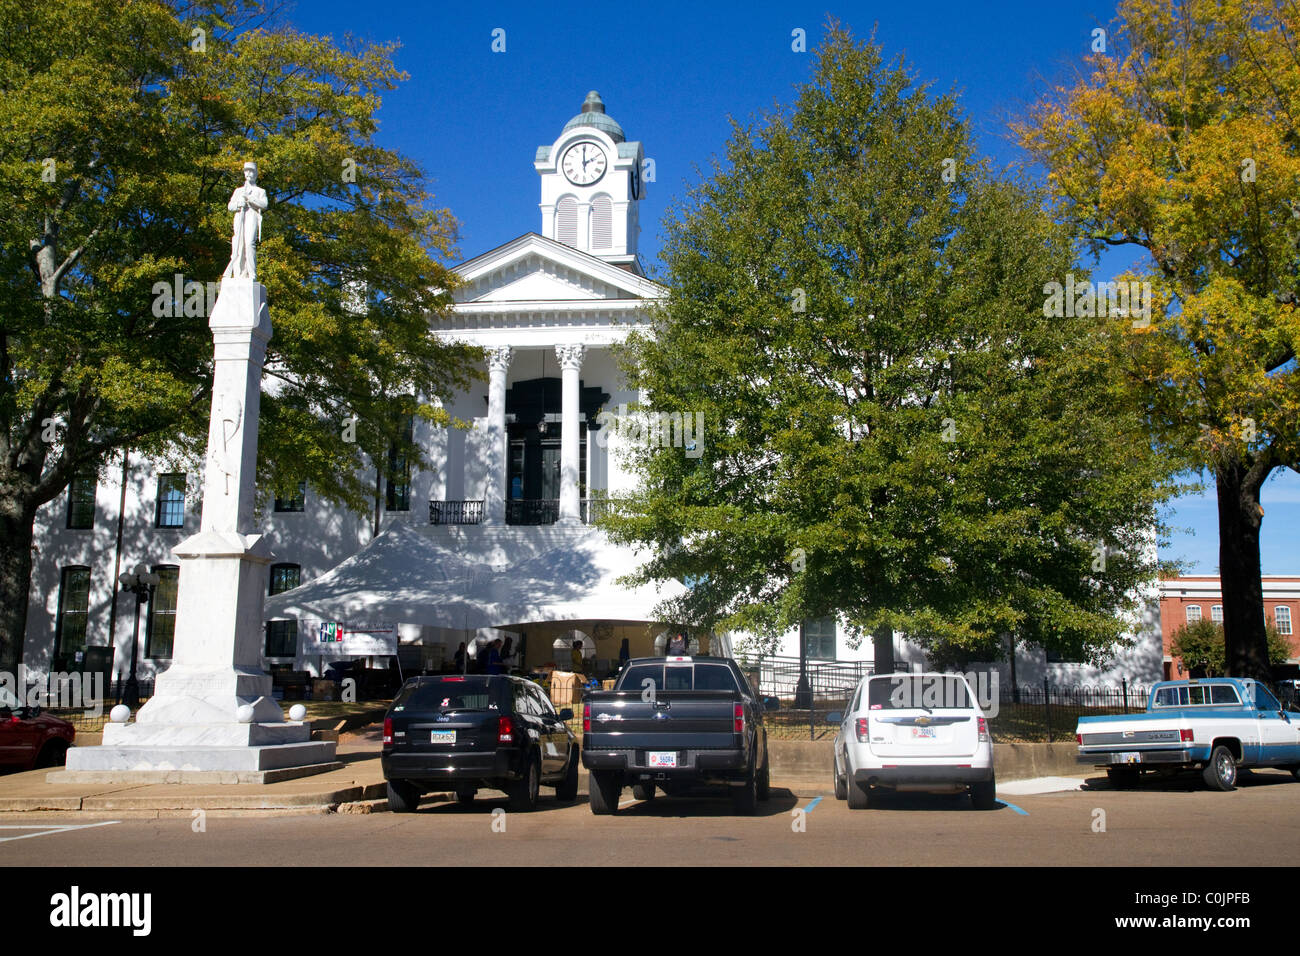 The Lafayette County Courthouse located in 'The Square' area of Oxford, Mississippi, USA. Stock Photo